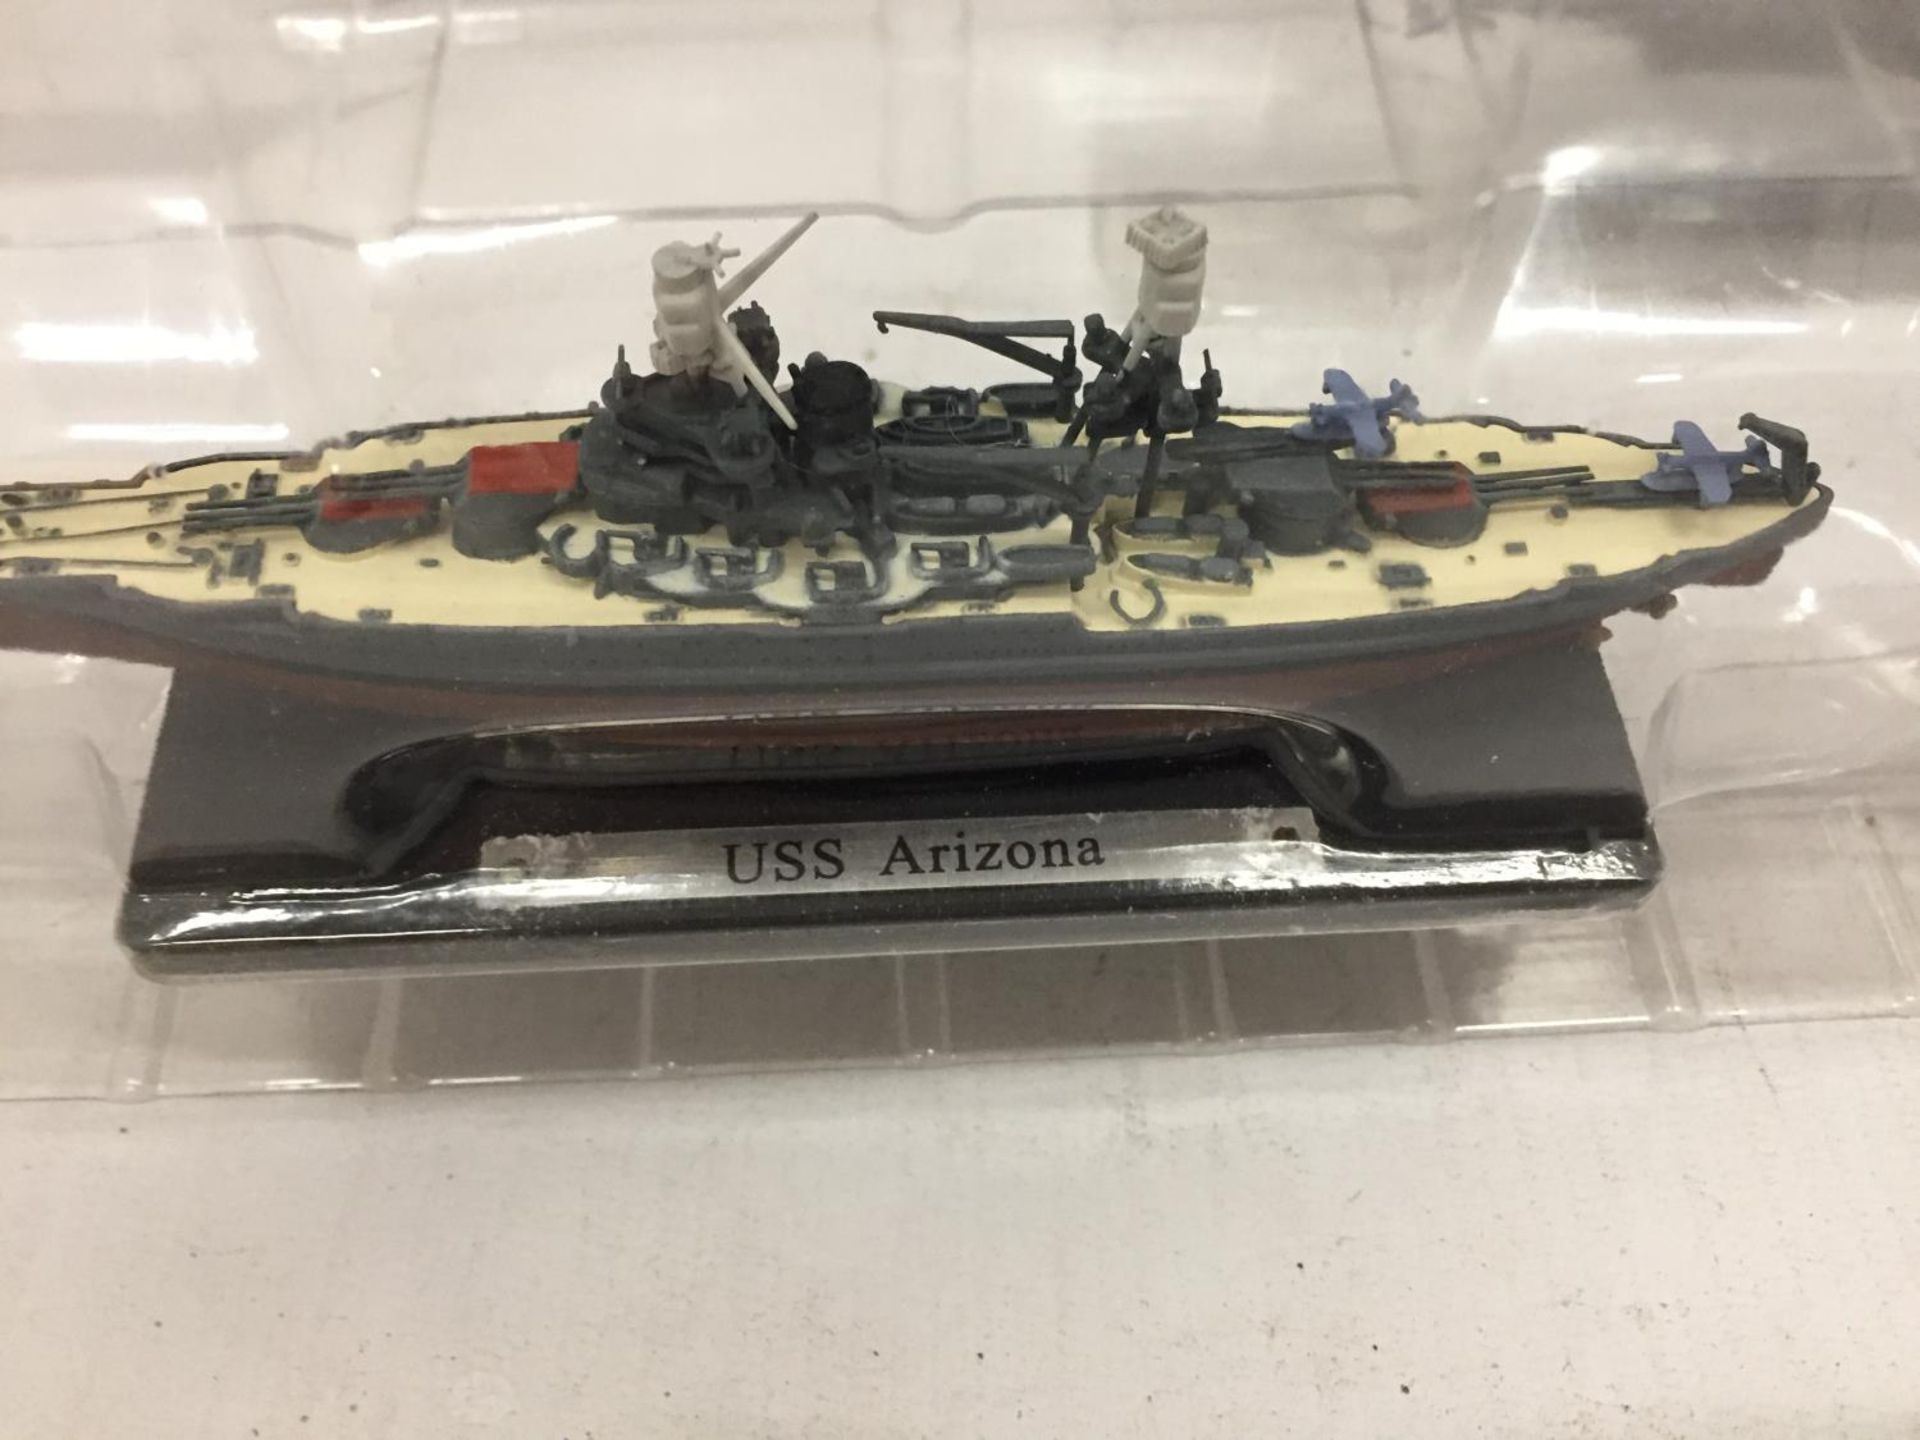 TWO DEAGOSTINI MODELS OF SHIPS - USS ARIZONA AND USS HORNET - Image 3 of 4